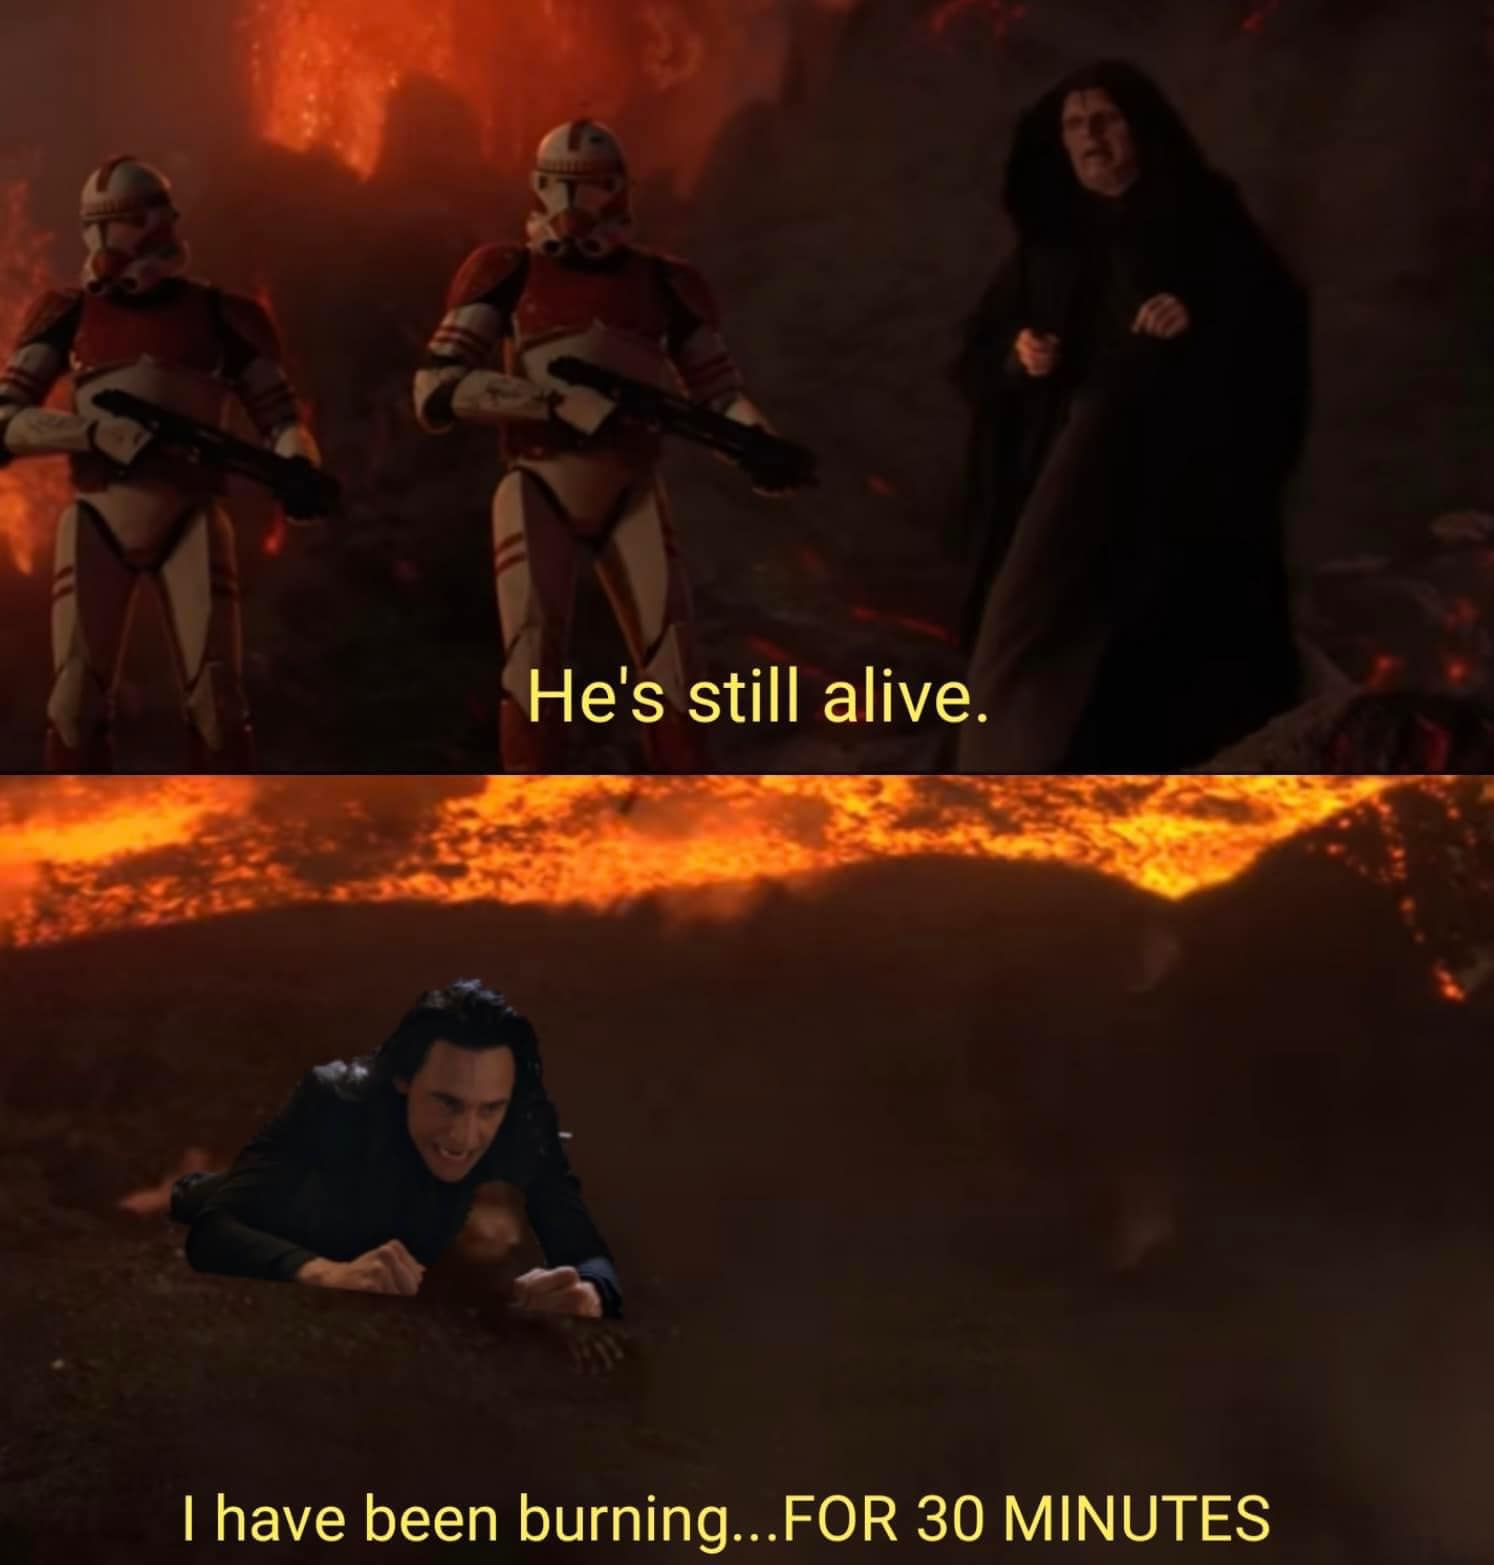 dank memes - funny memes - darkness - He's still alive. I have been burning...For 30 Minutes